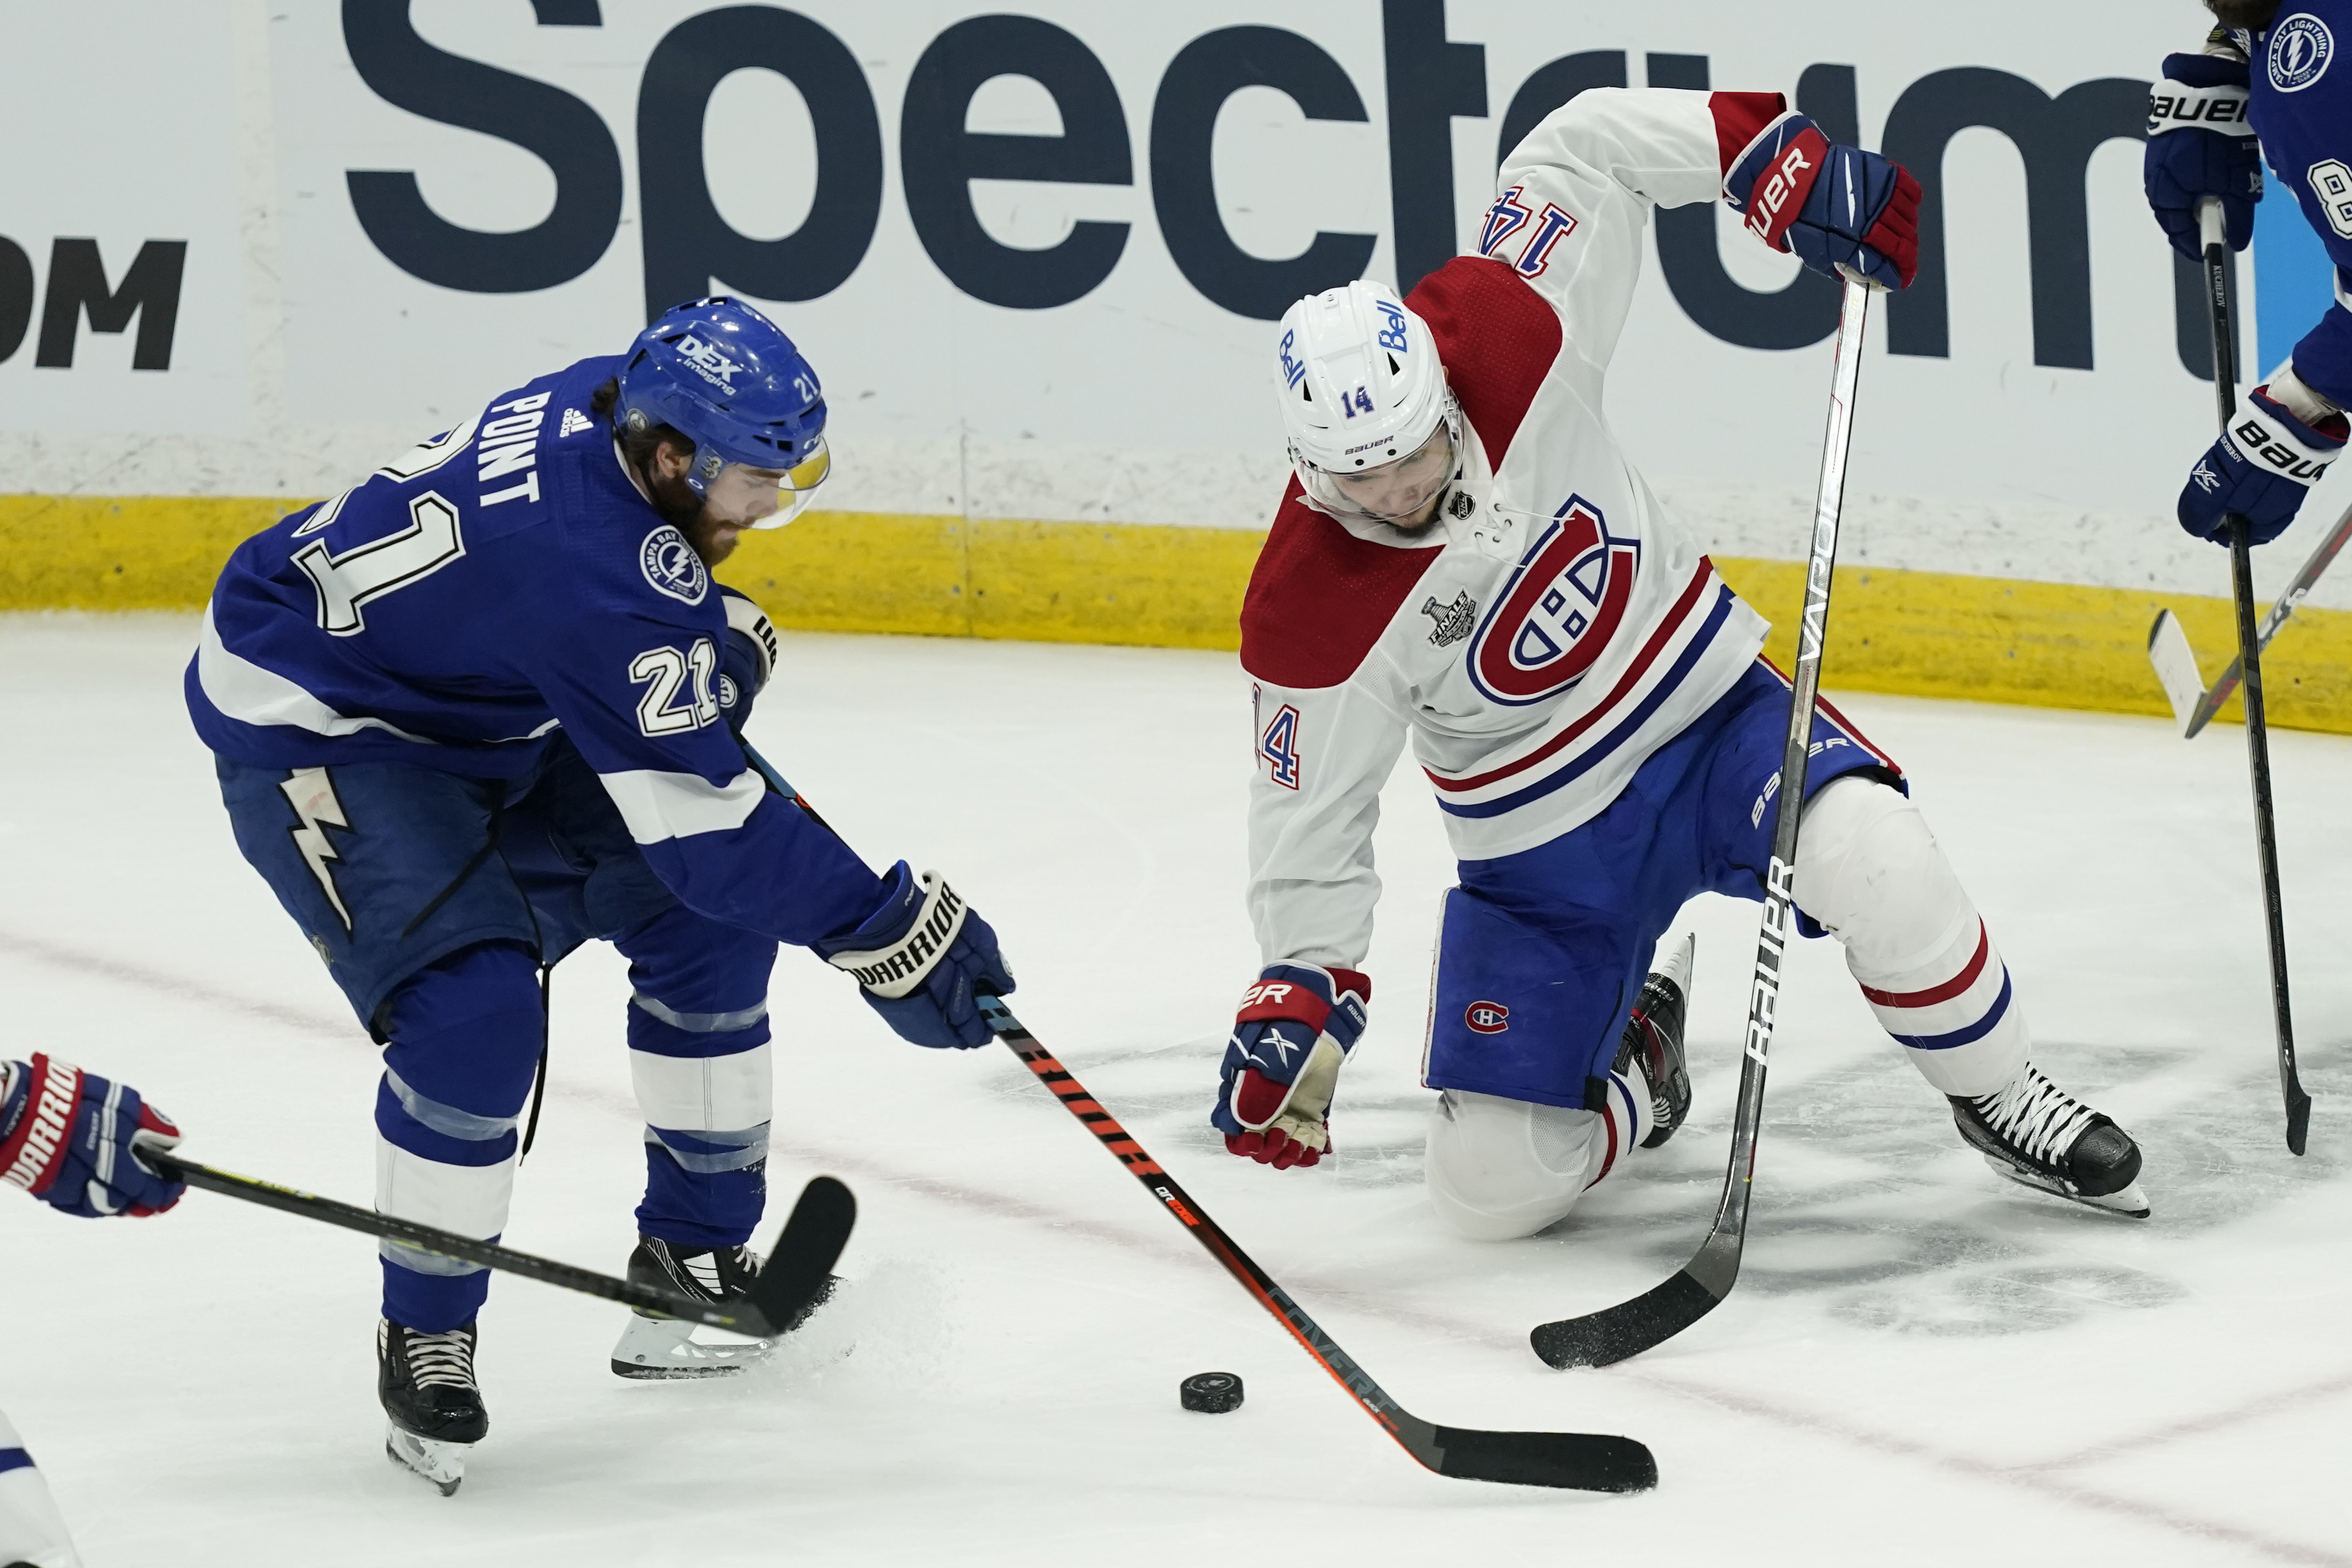 watch montreal hockey game online free